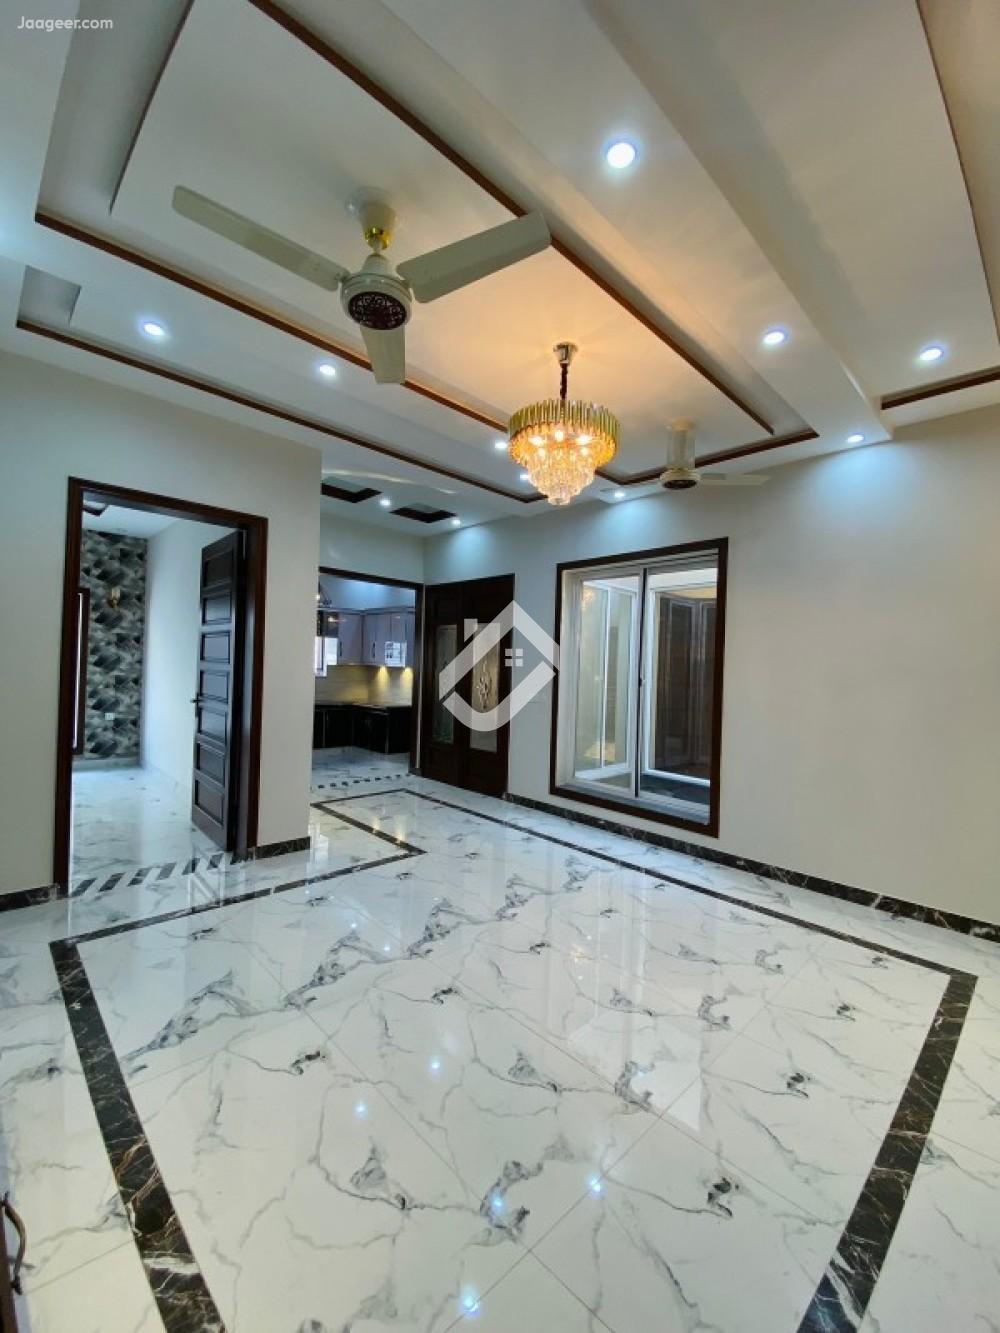 Main image 10 Marla Double Storey House For Sale In Bahria Town Overseas- Block Bahria Town, Lahore